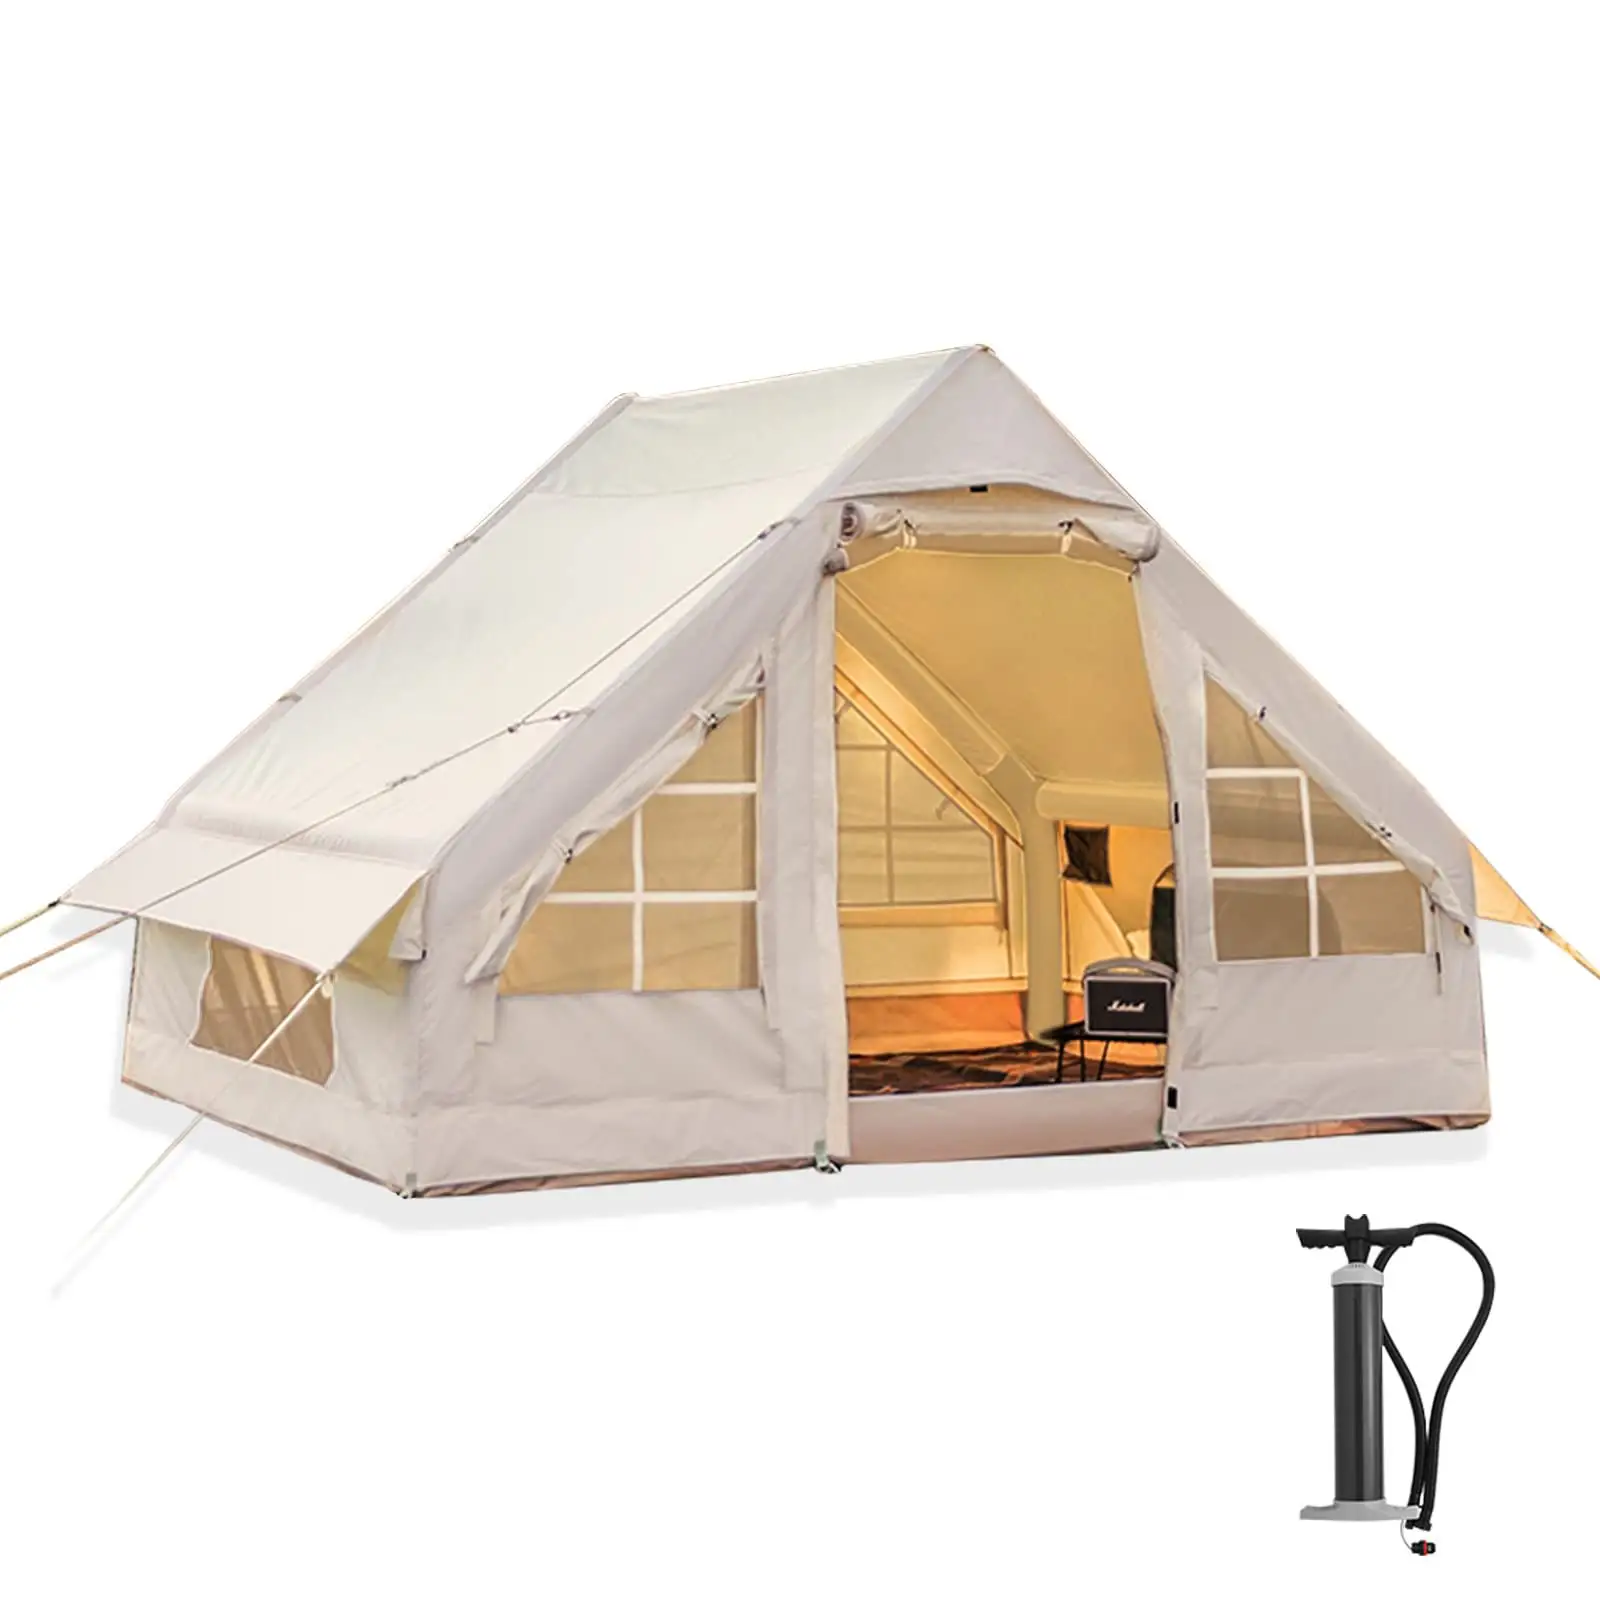 New bivy wedding marquee luxury wedding modern strech inflatable party tent inflatable Outdoor Camping Polyester Air Family Tent